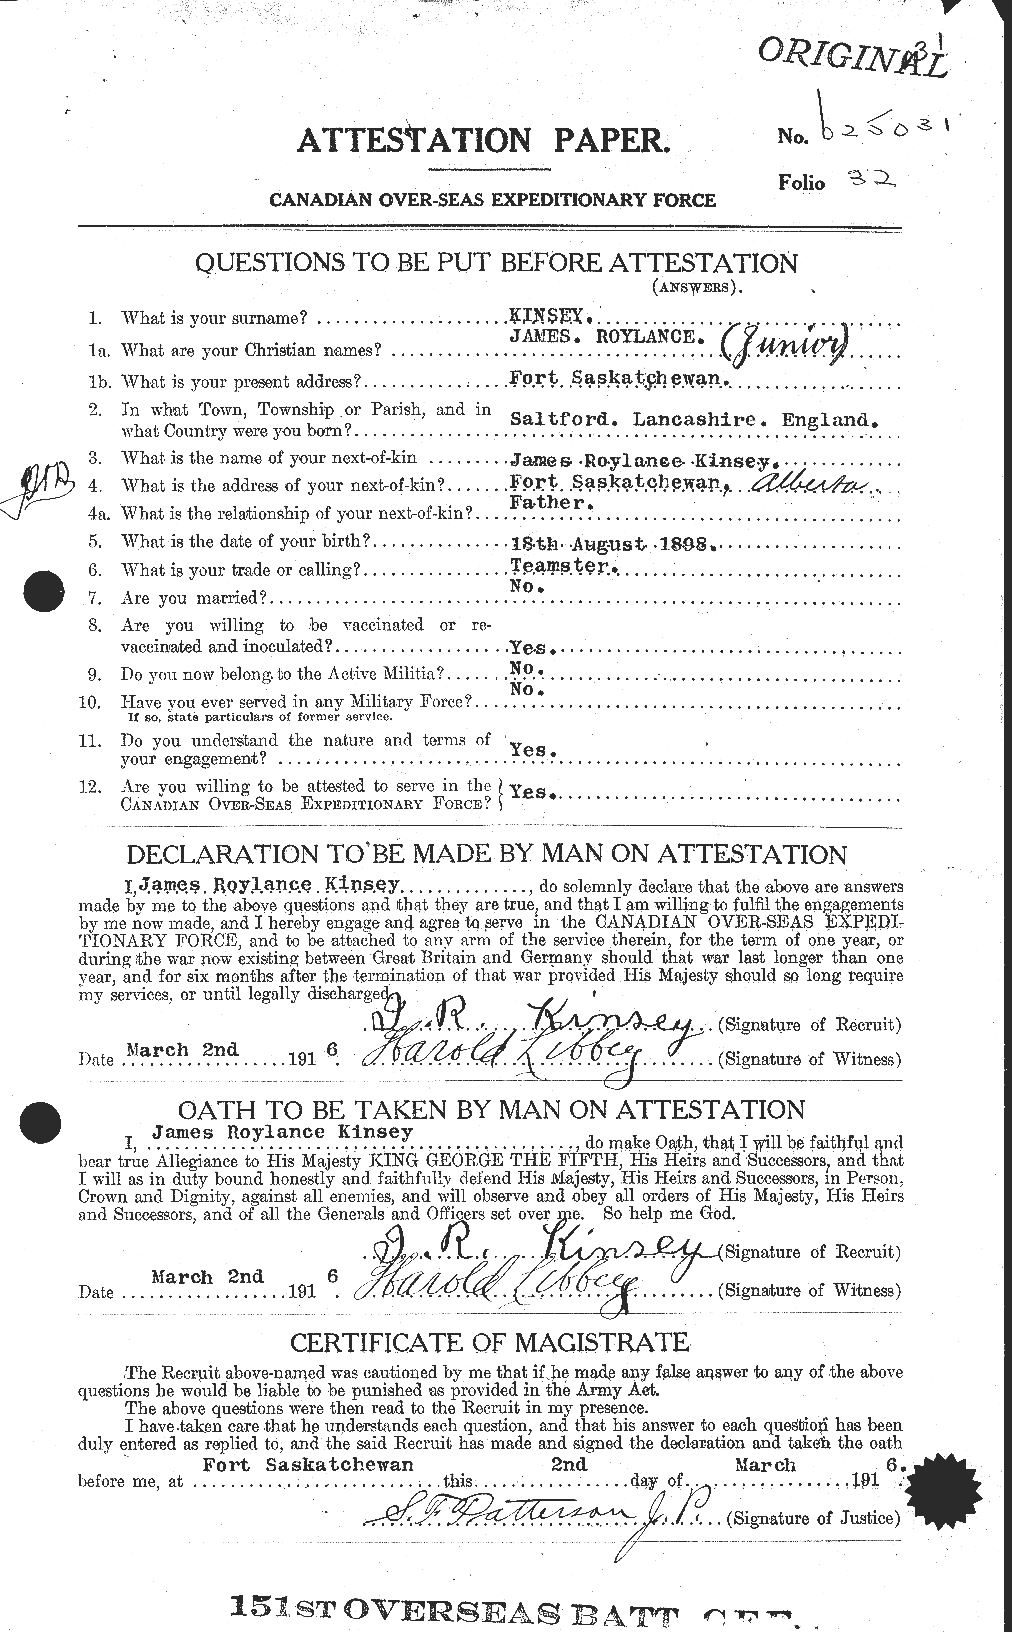 Personnel Records of the First World War - CEF 437015a